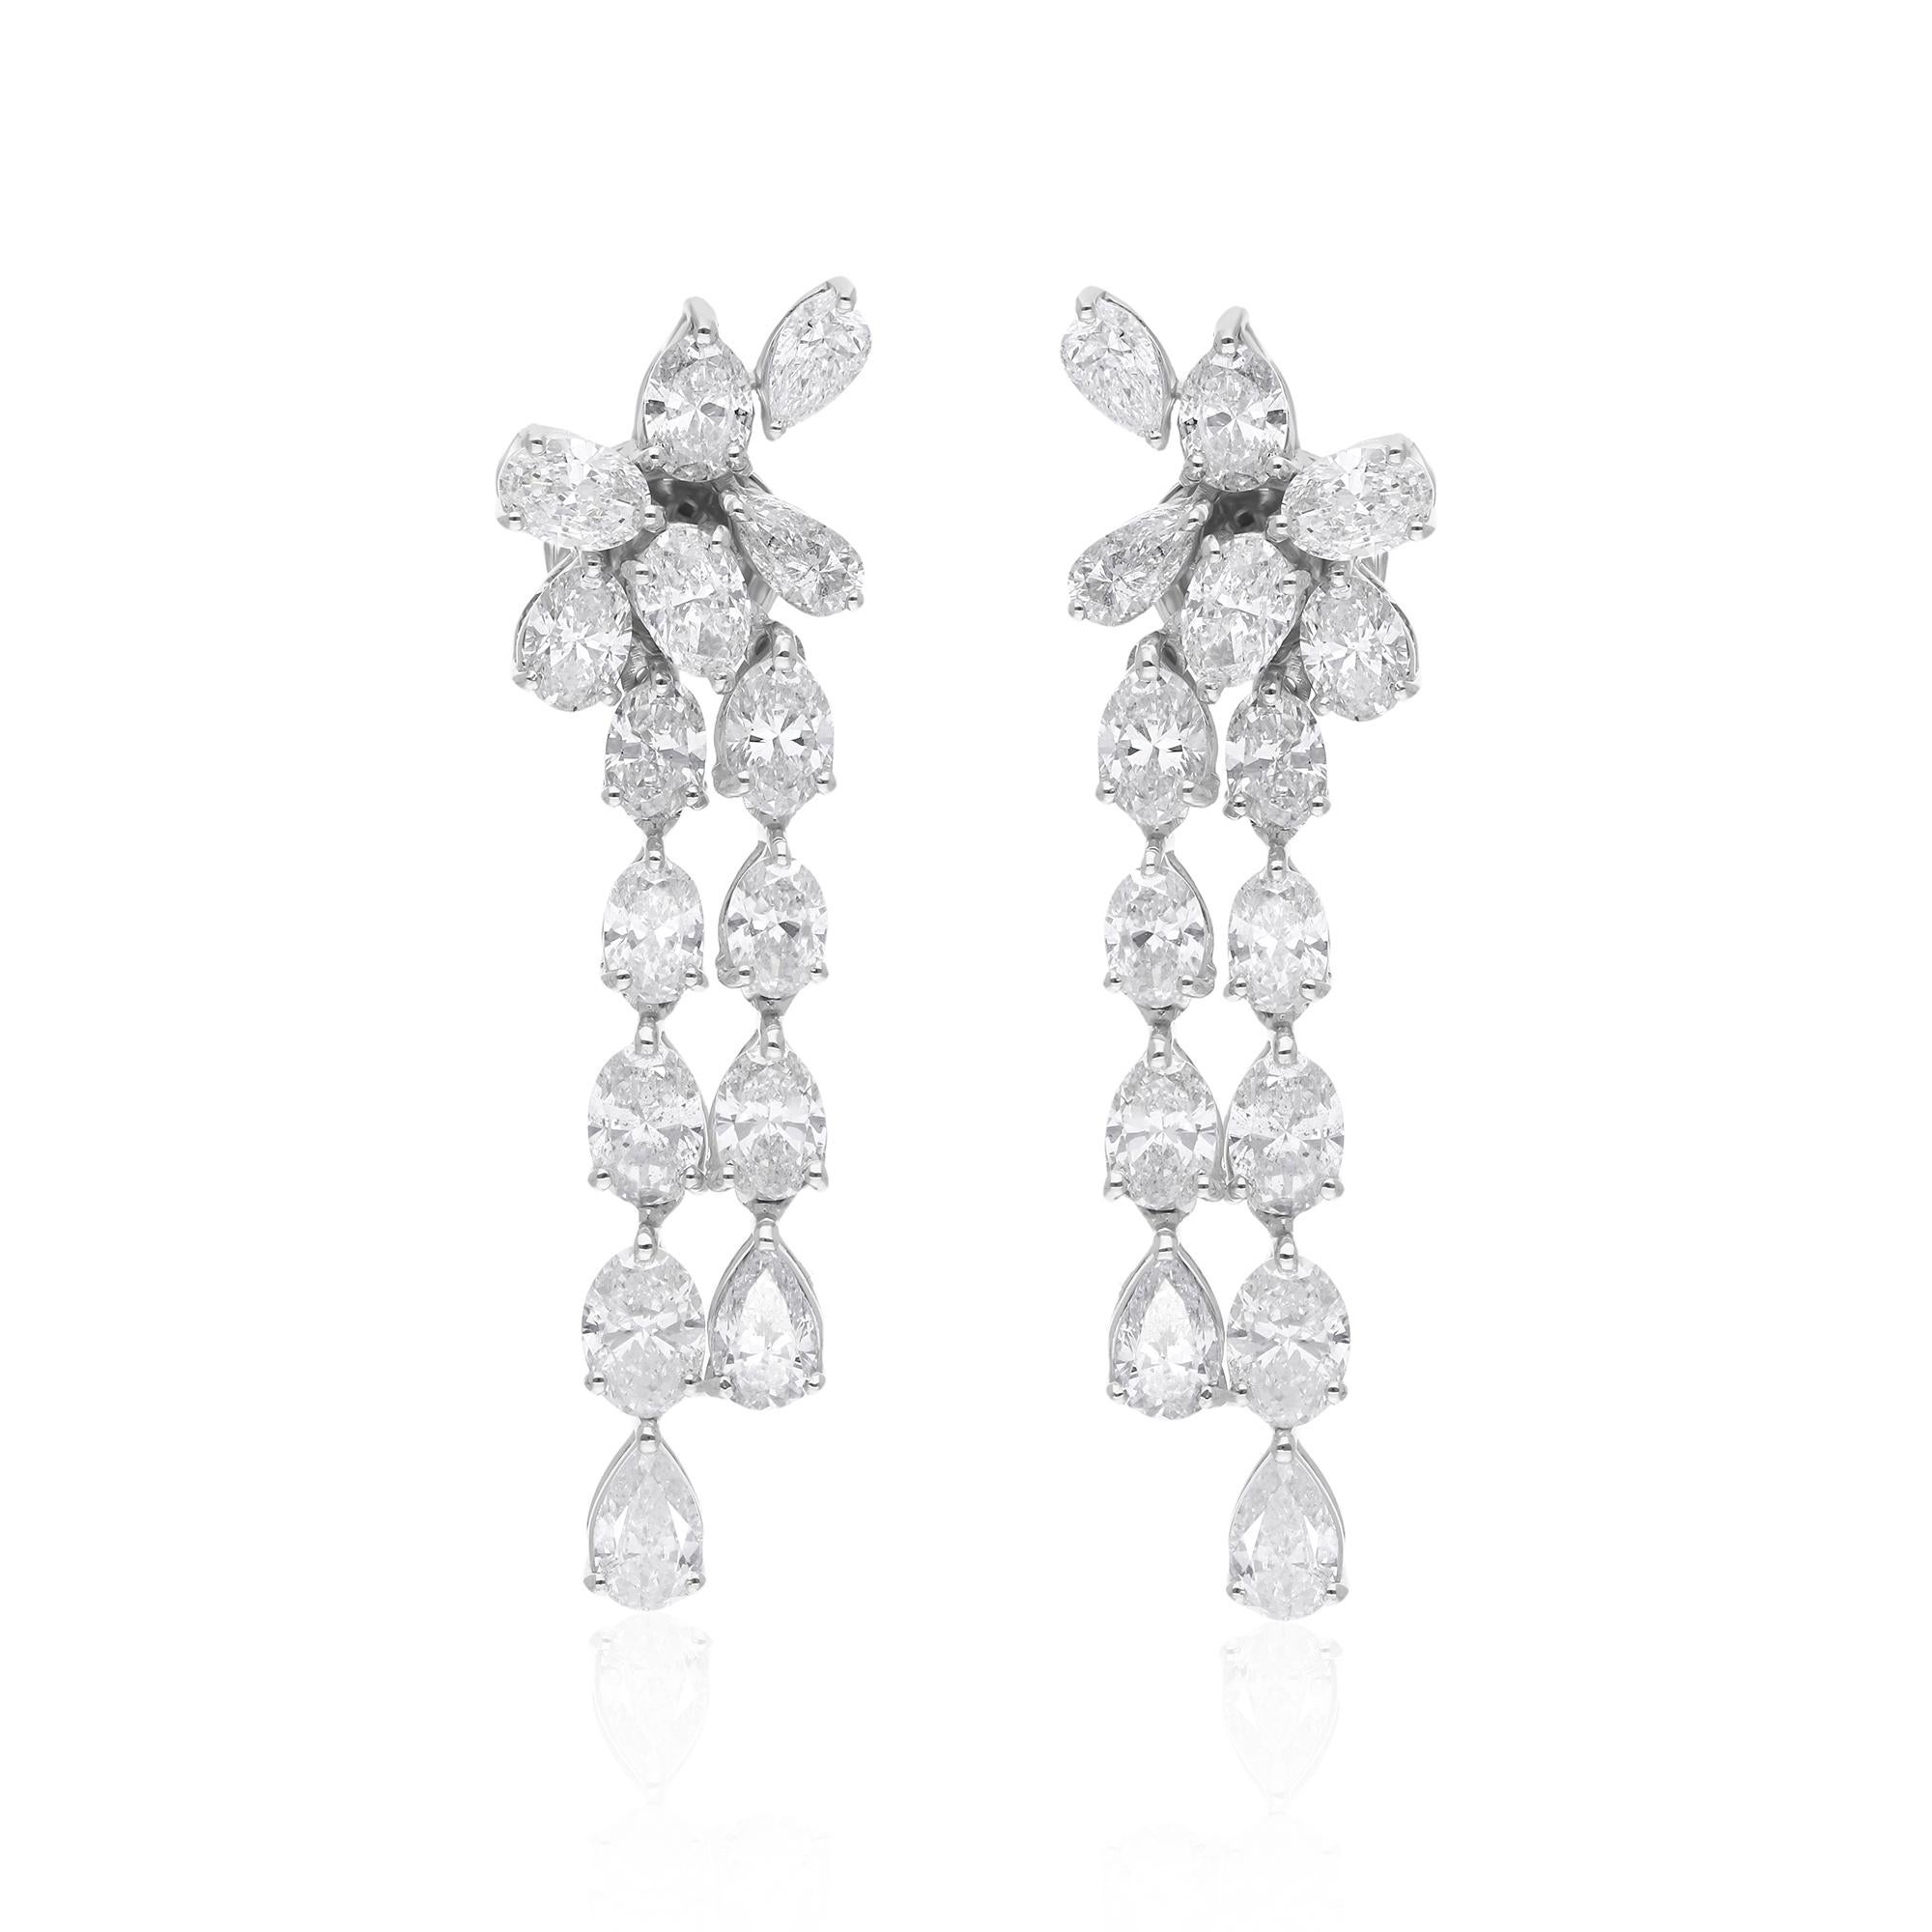 The centerpiece of each earring is a dazzling oval-cut diamond, exuding timeless charm and enchanting sparkle. These magnificent stones are carefully selected for their exceptional quality, radiance, and fire, ensuring that they catch and reflect